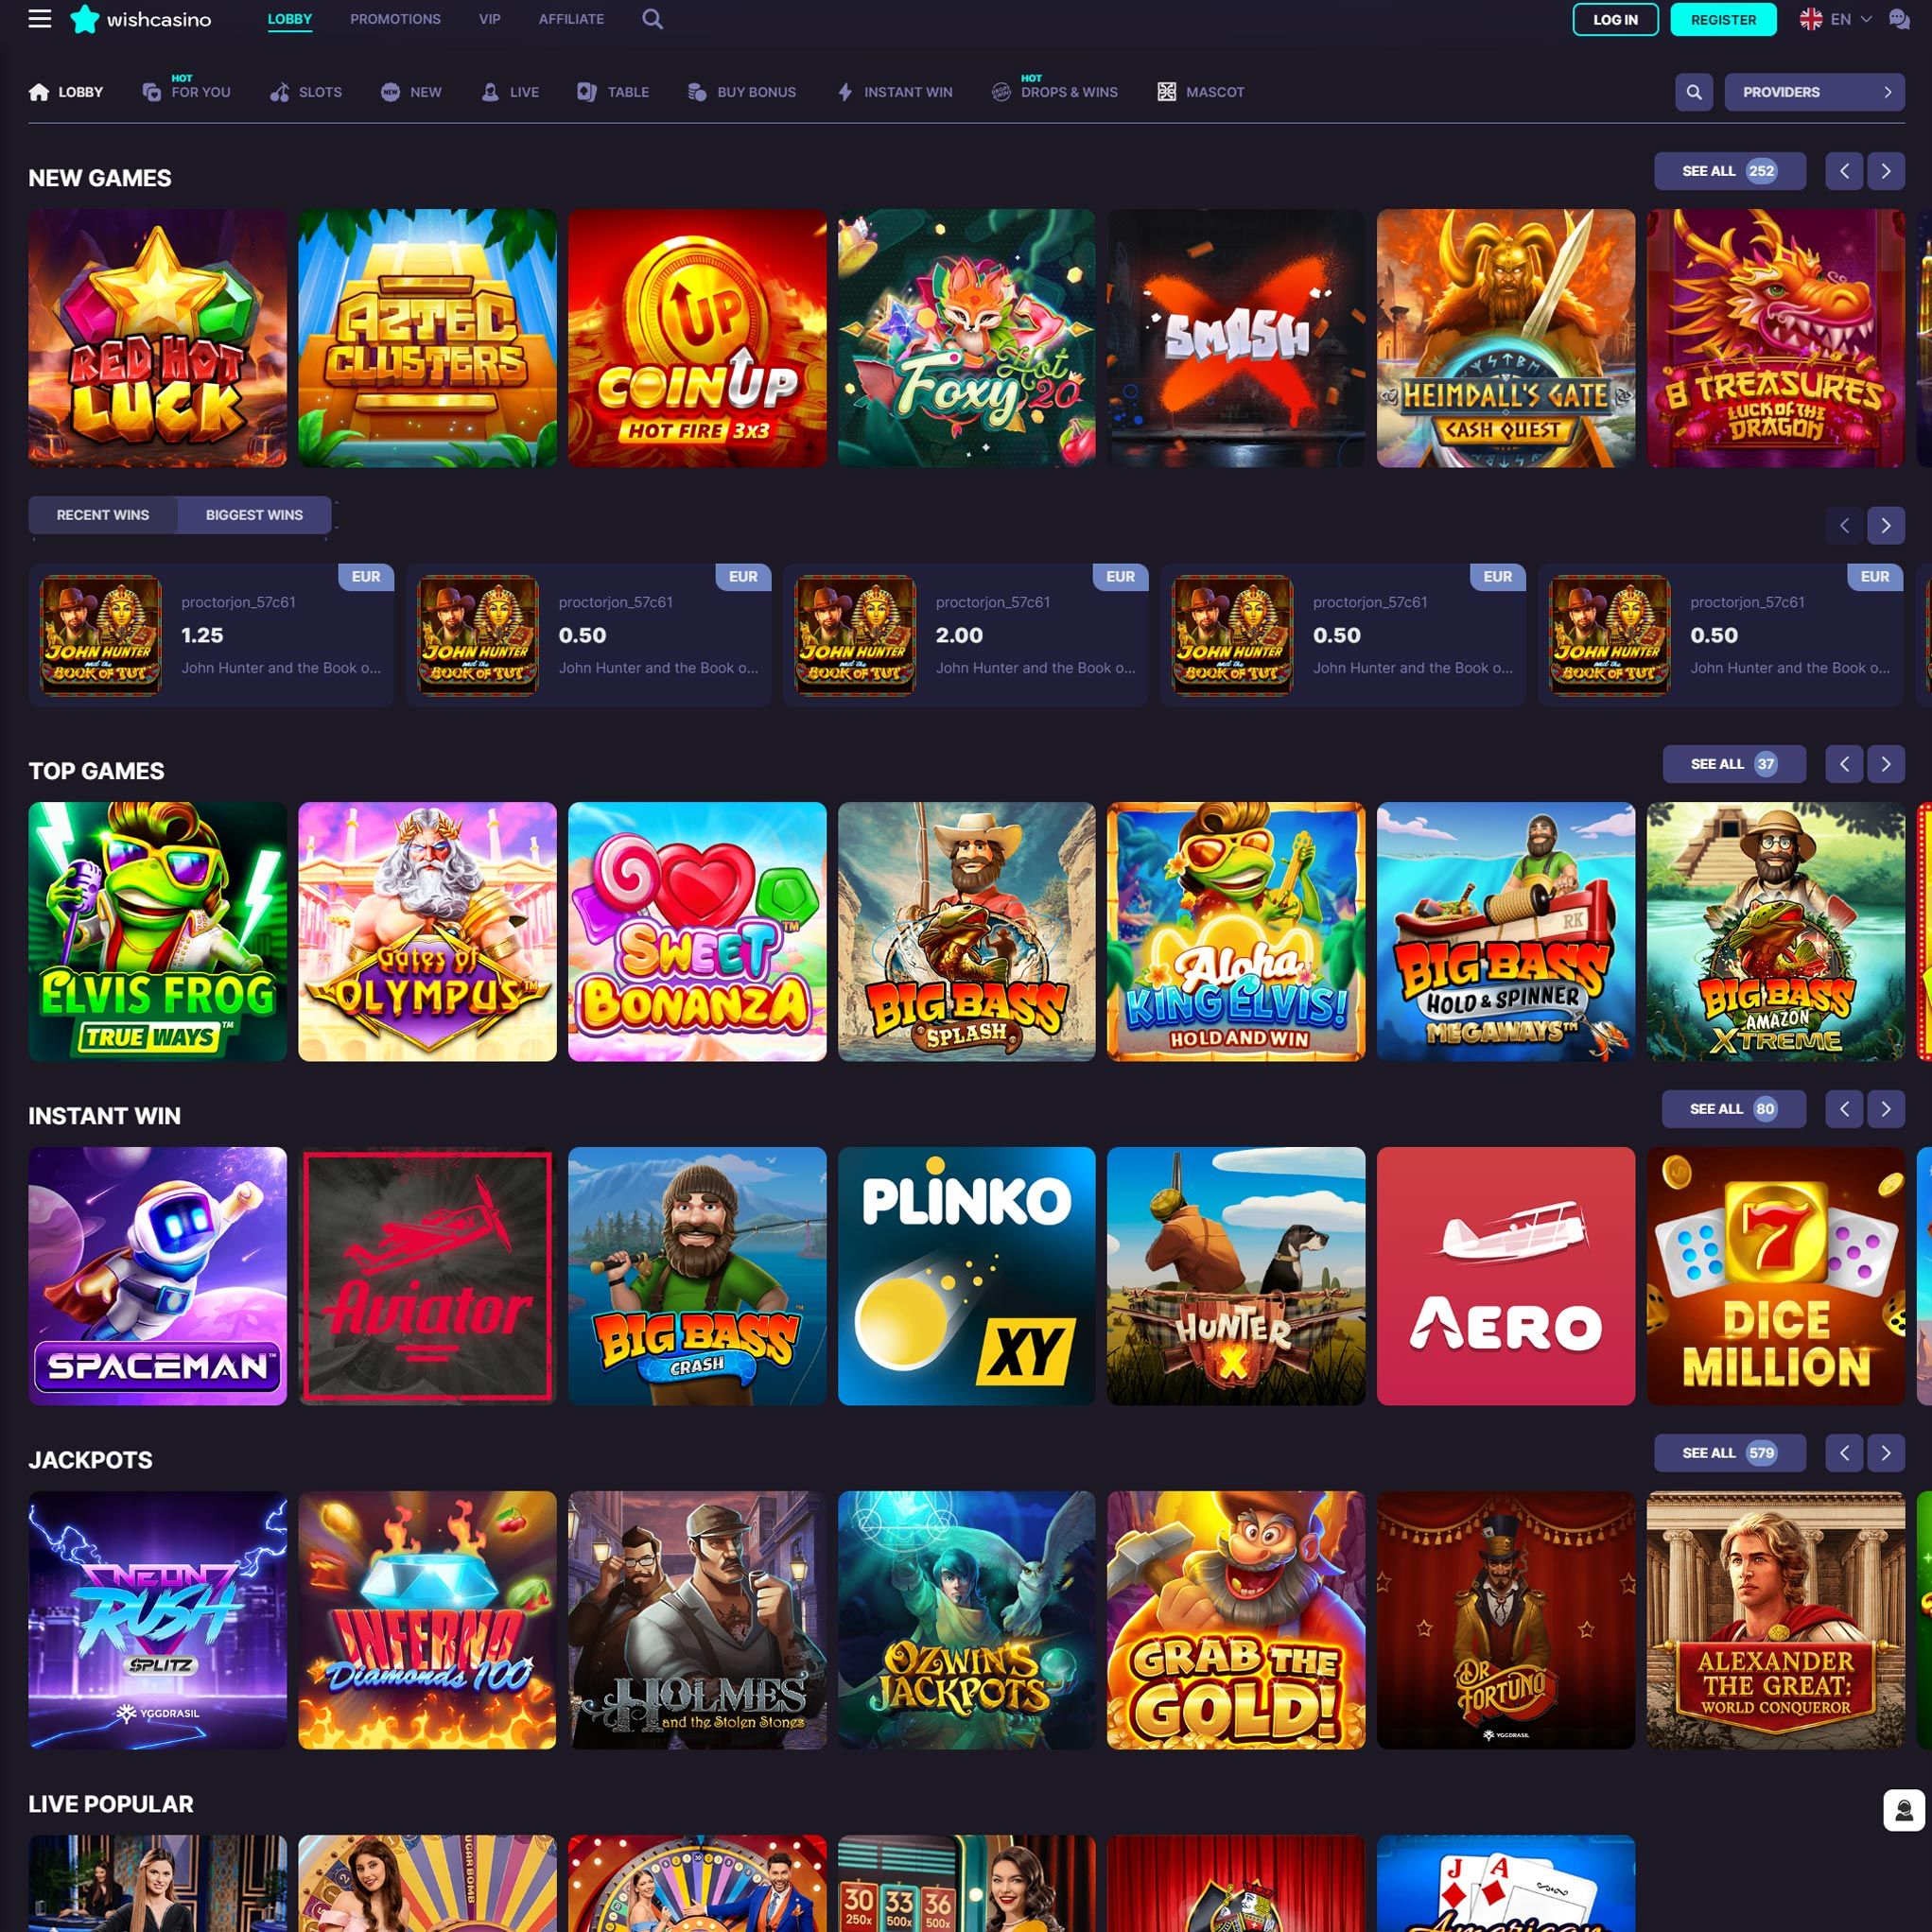 Wish Casino review by Mr. Gamble